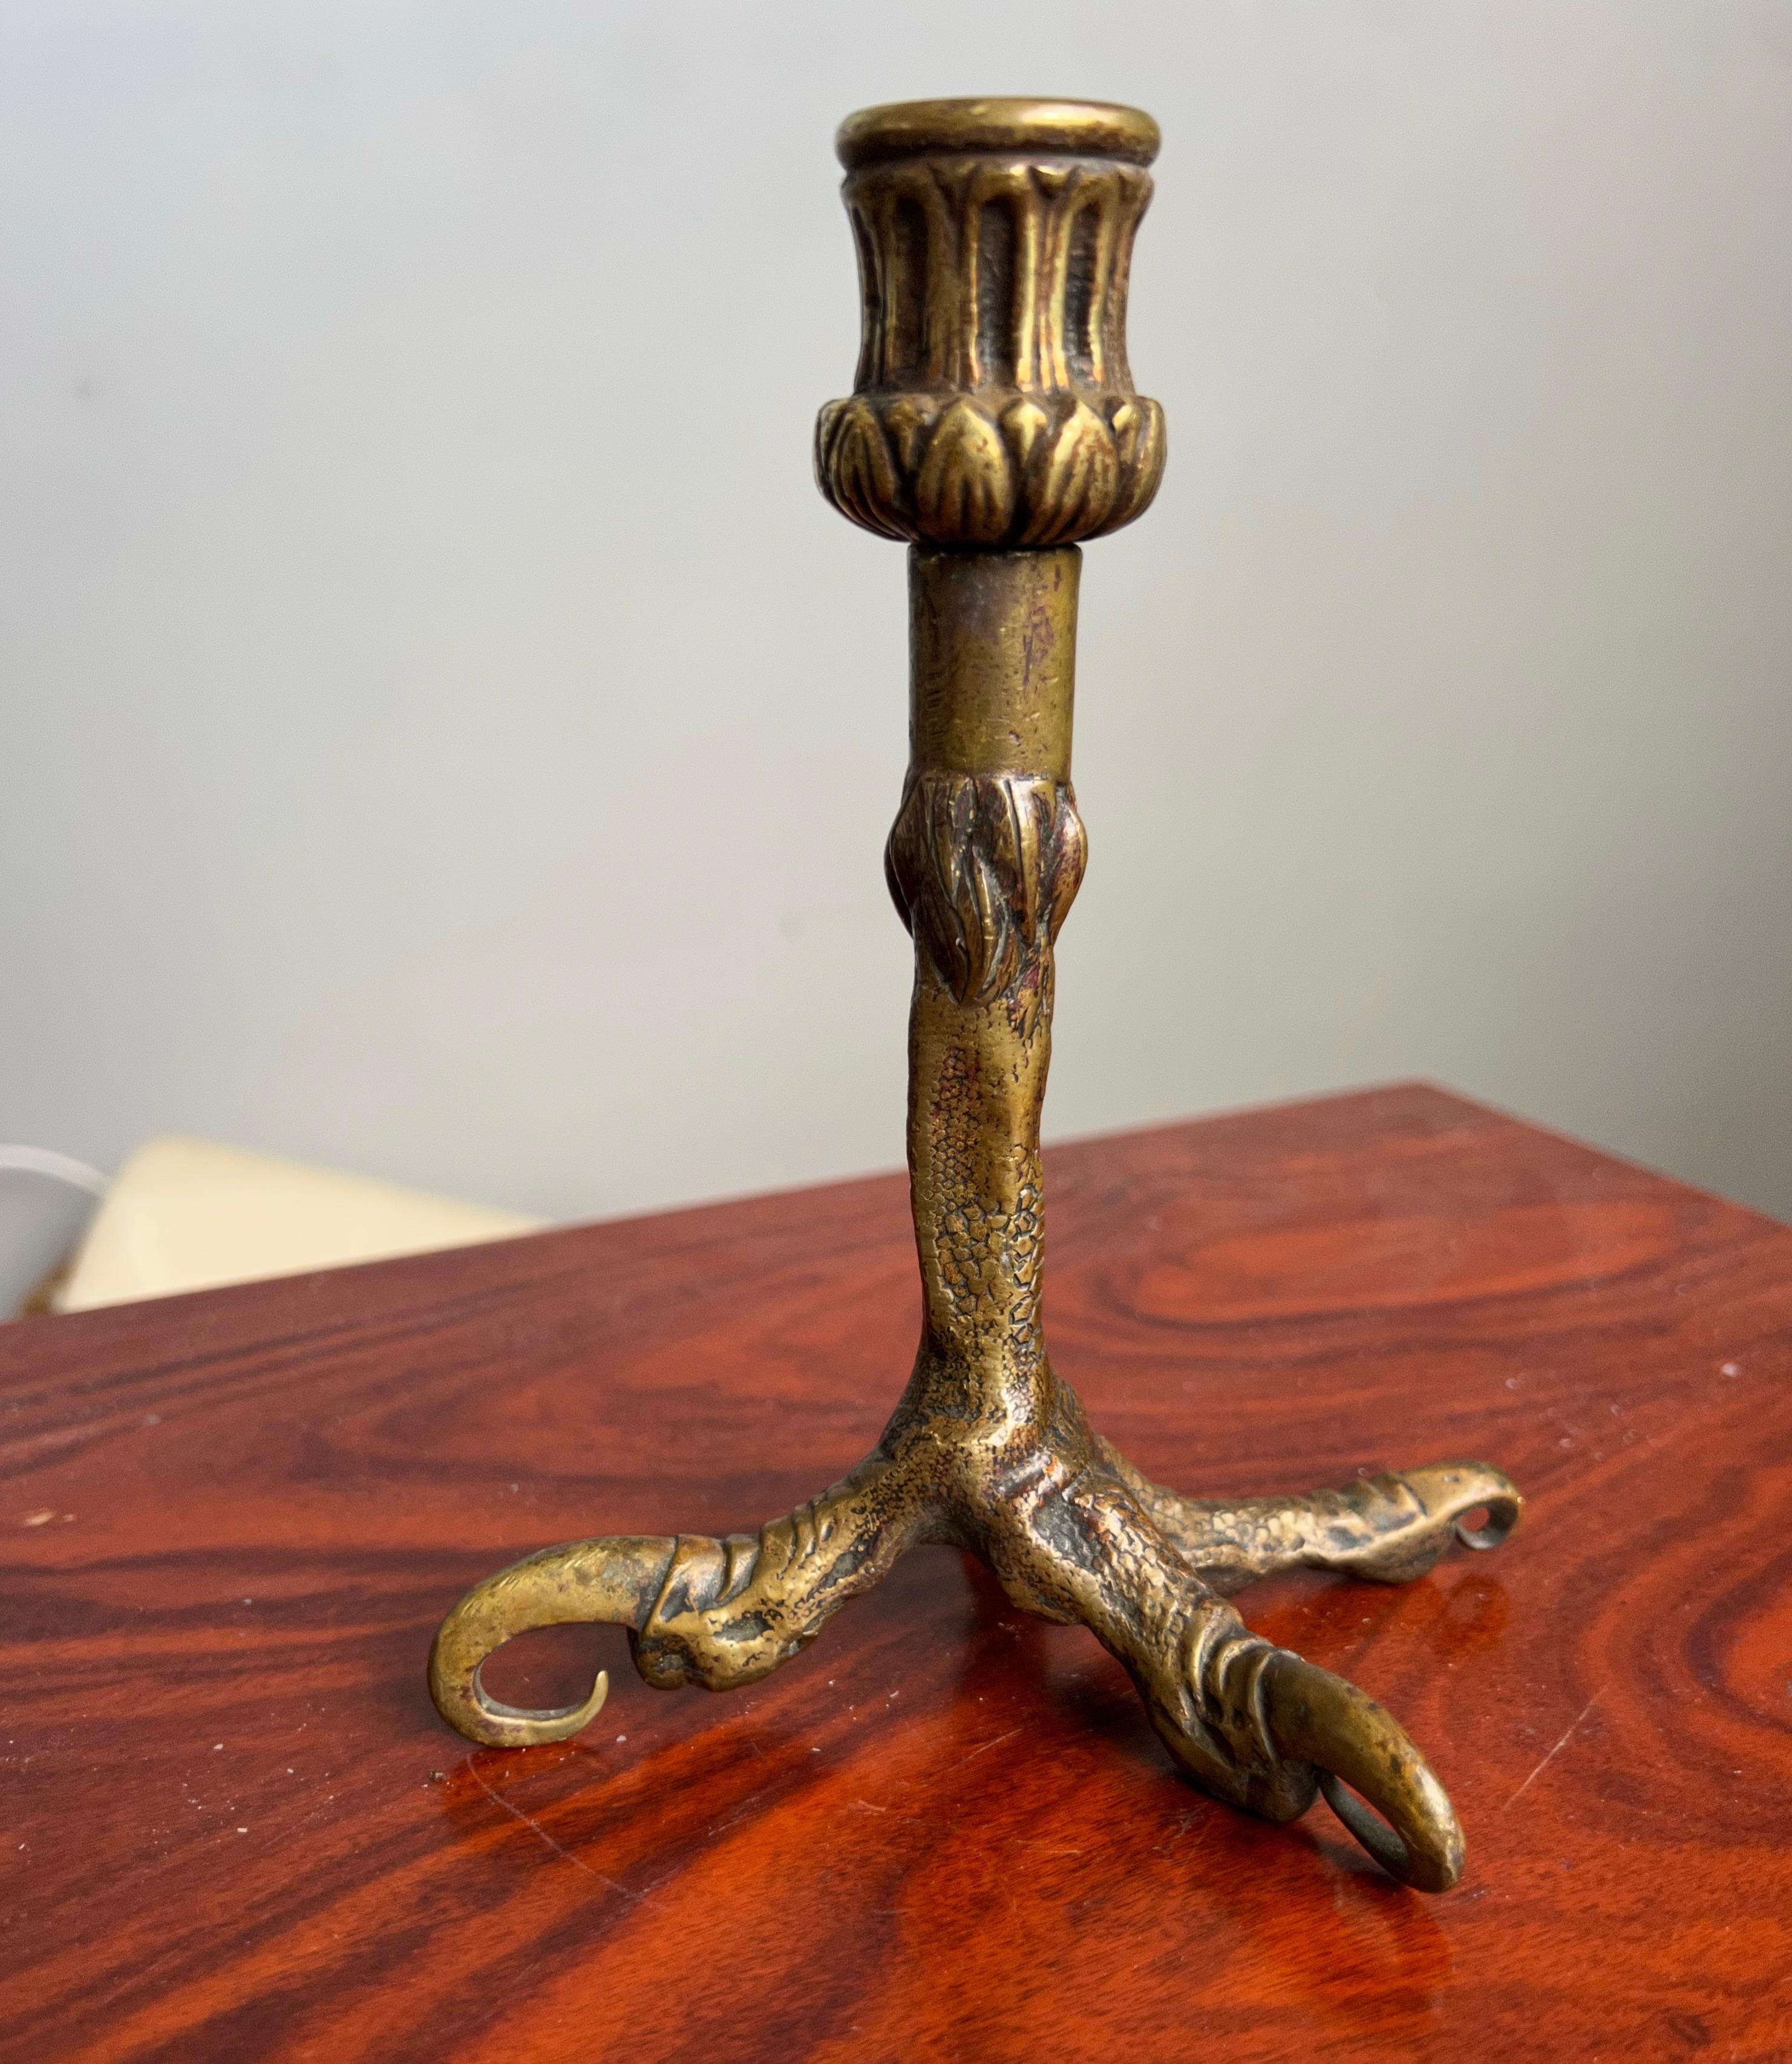 Top quality made and highly decorative, bronze eagle claw desk piece.

With the holiday season on our doorstep we will be offering a number of season related items, but also some smaller and lower priced art and antiques that will make great gifts